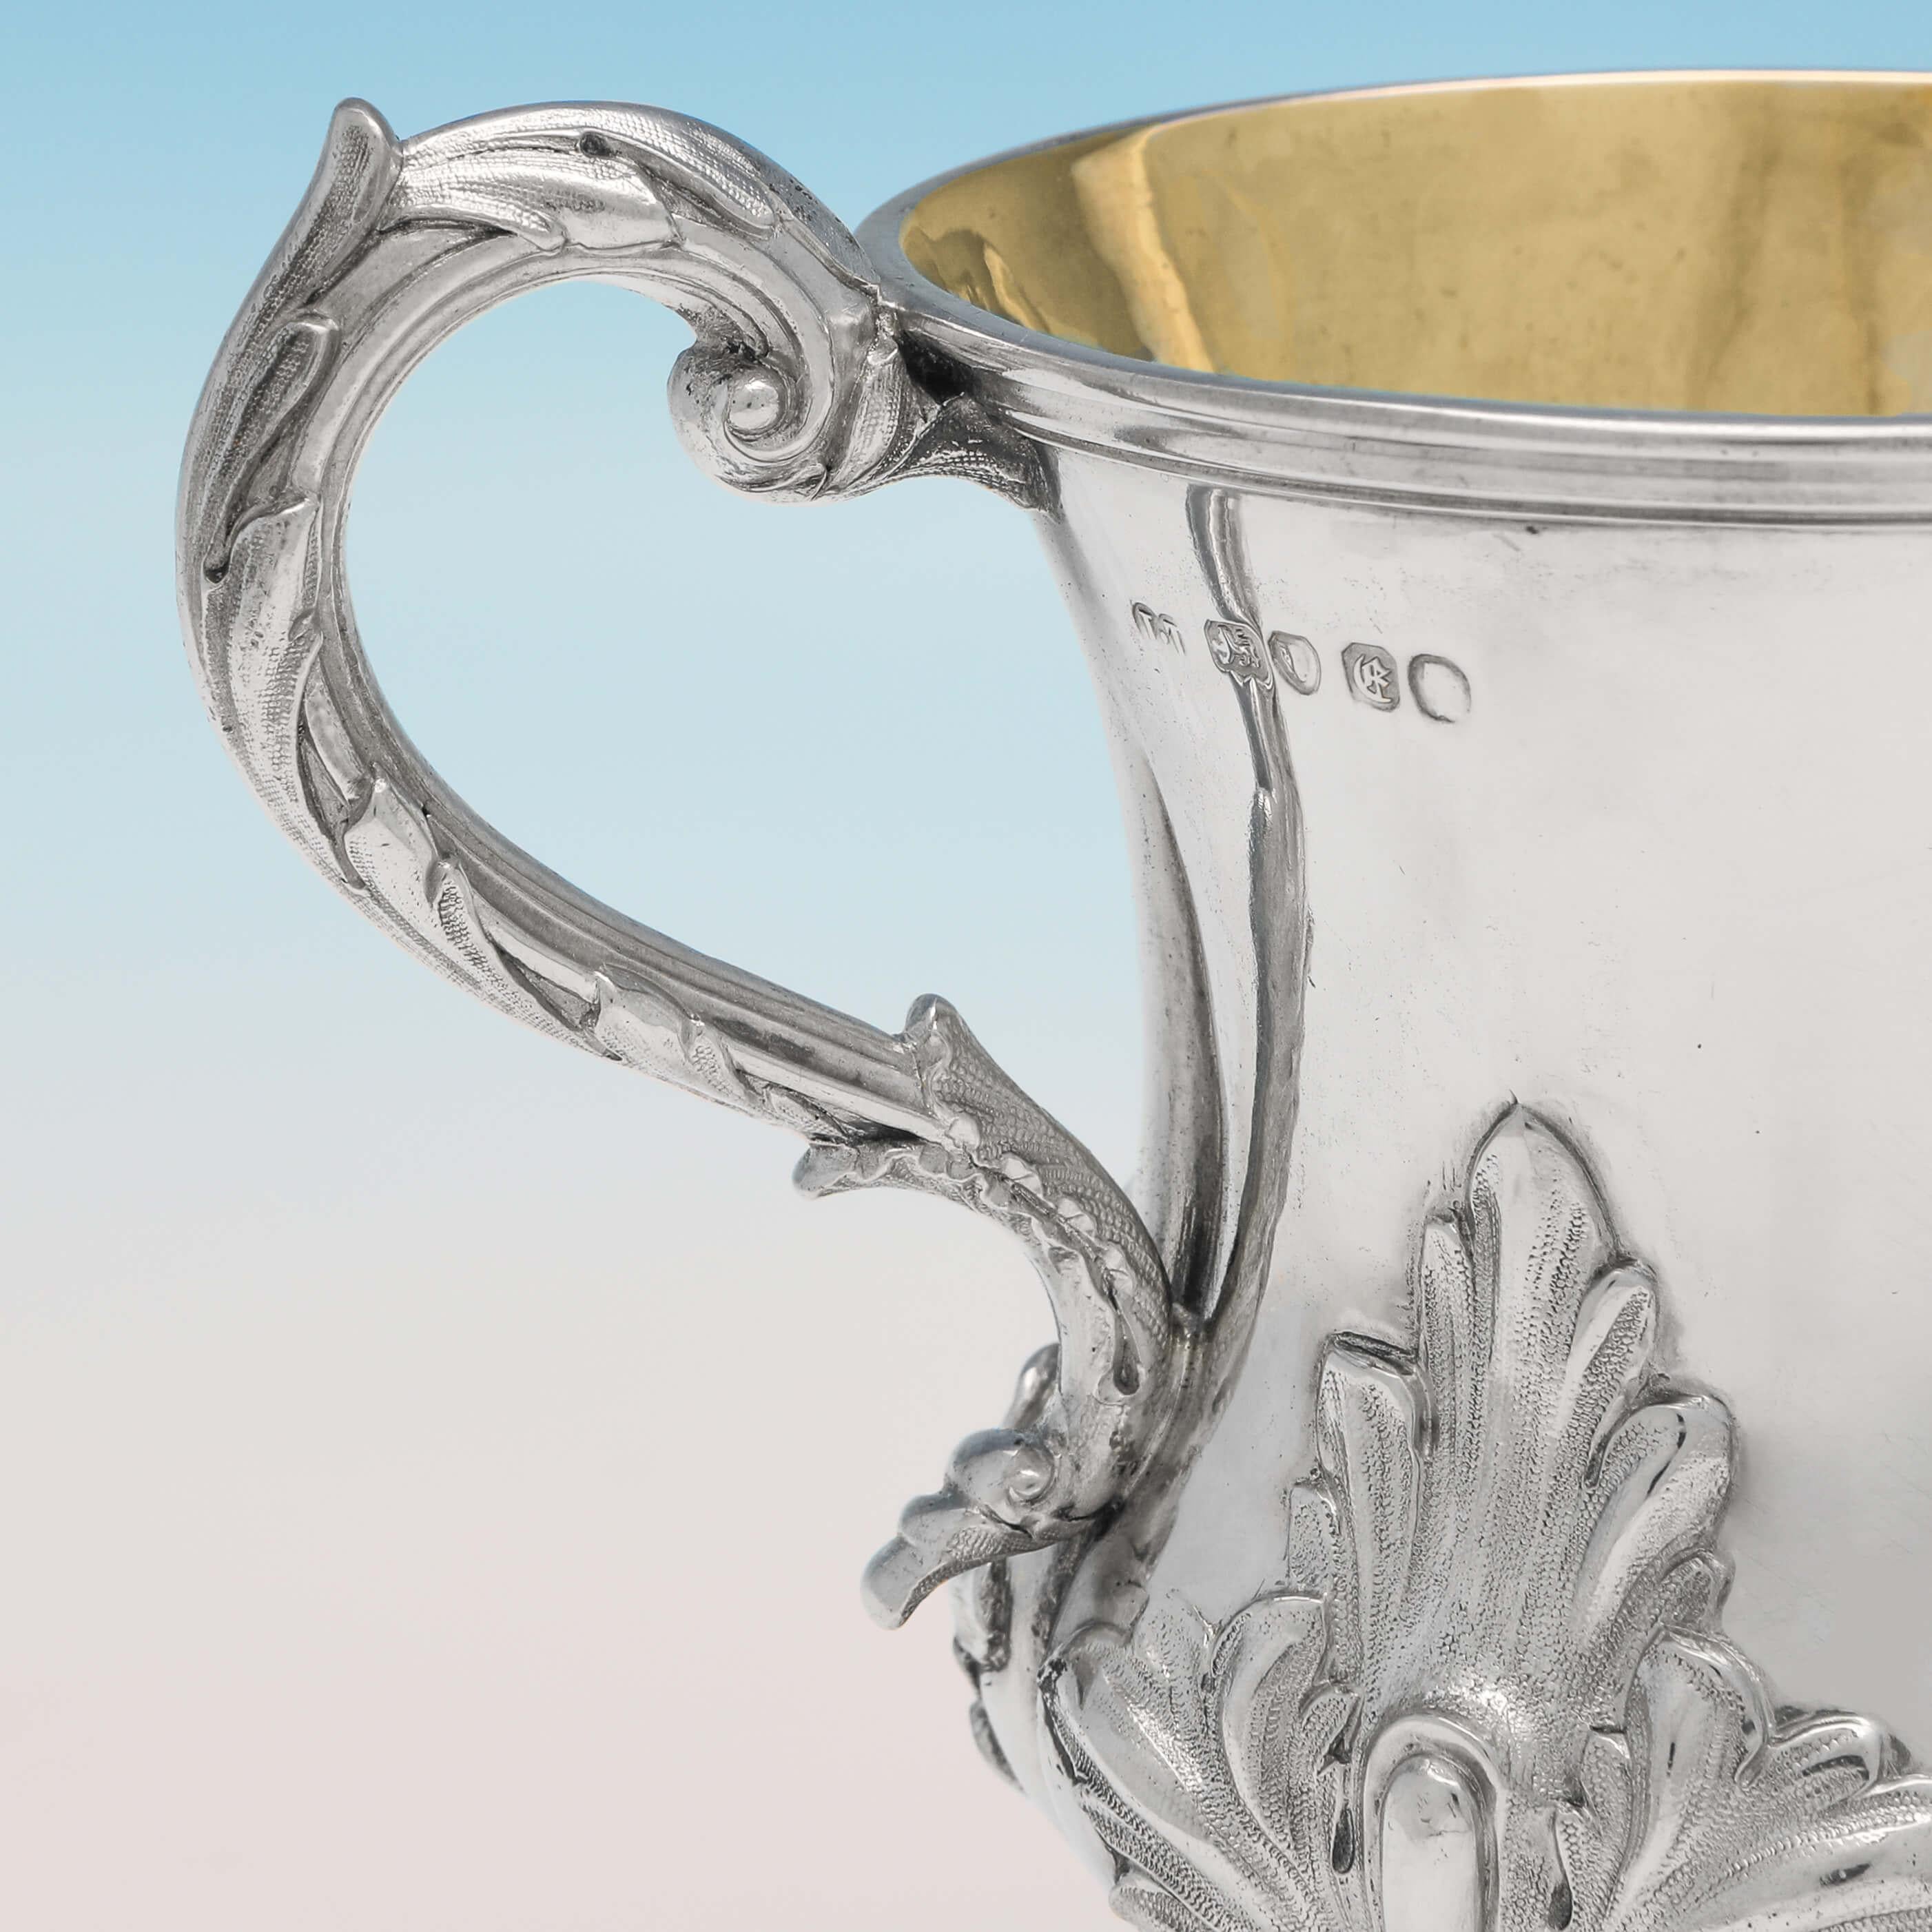 English Acanthus Decorated Victorian Sterling Silver Christening Mug from 1840